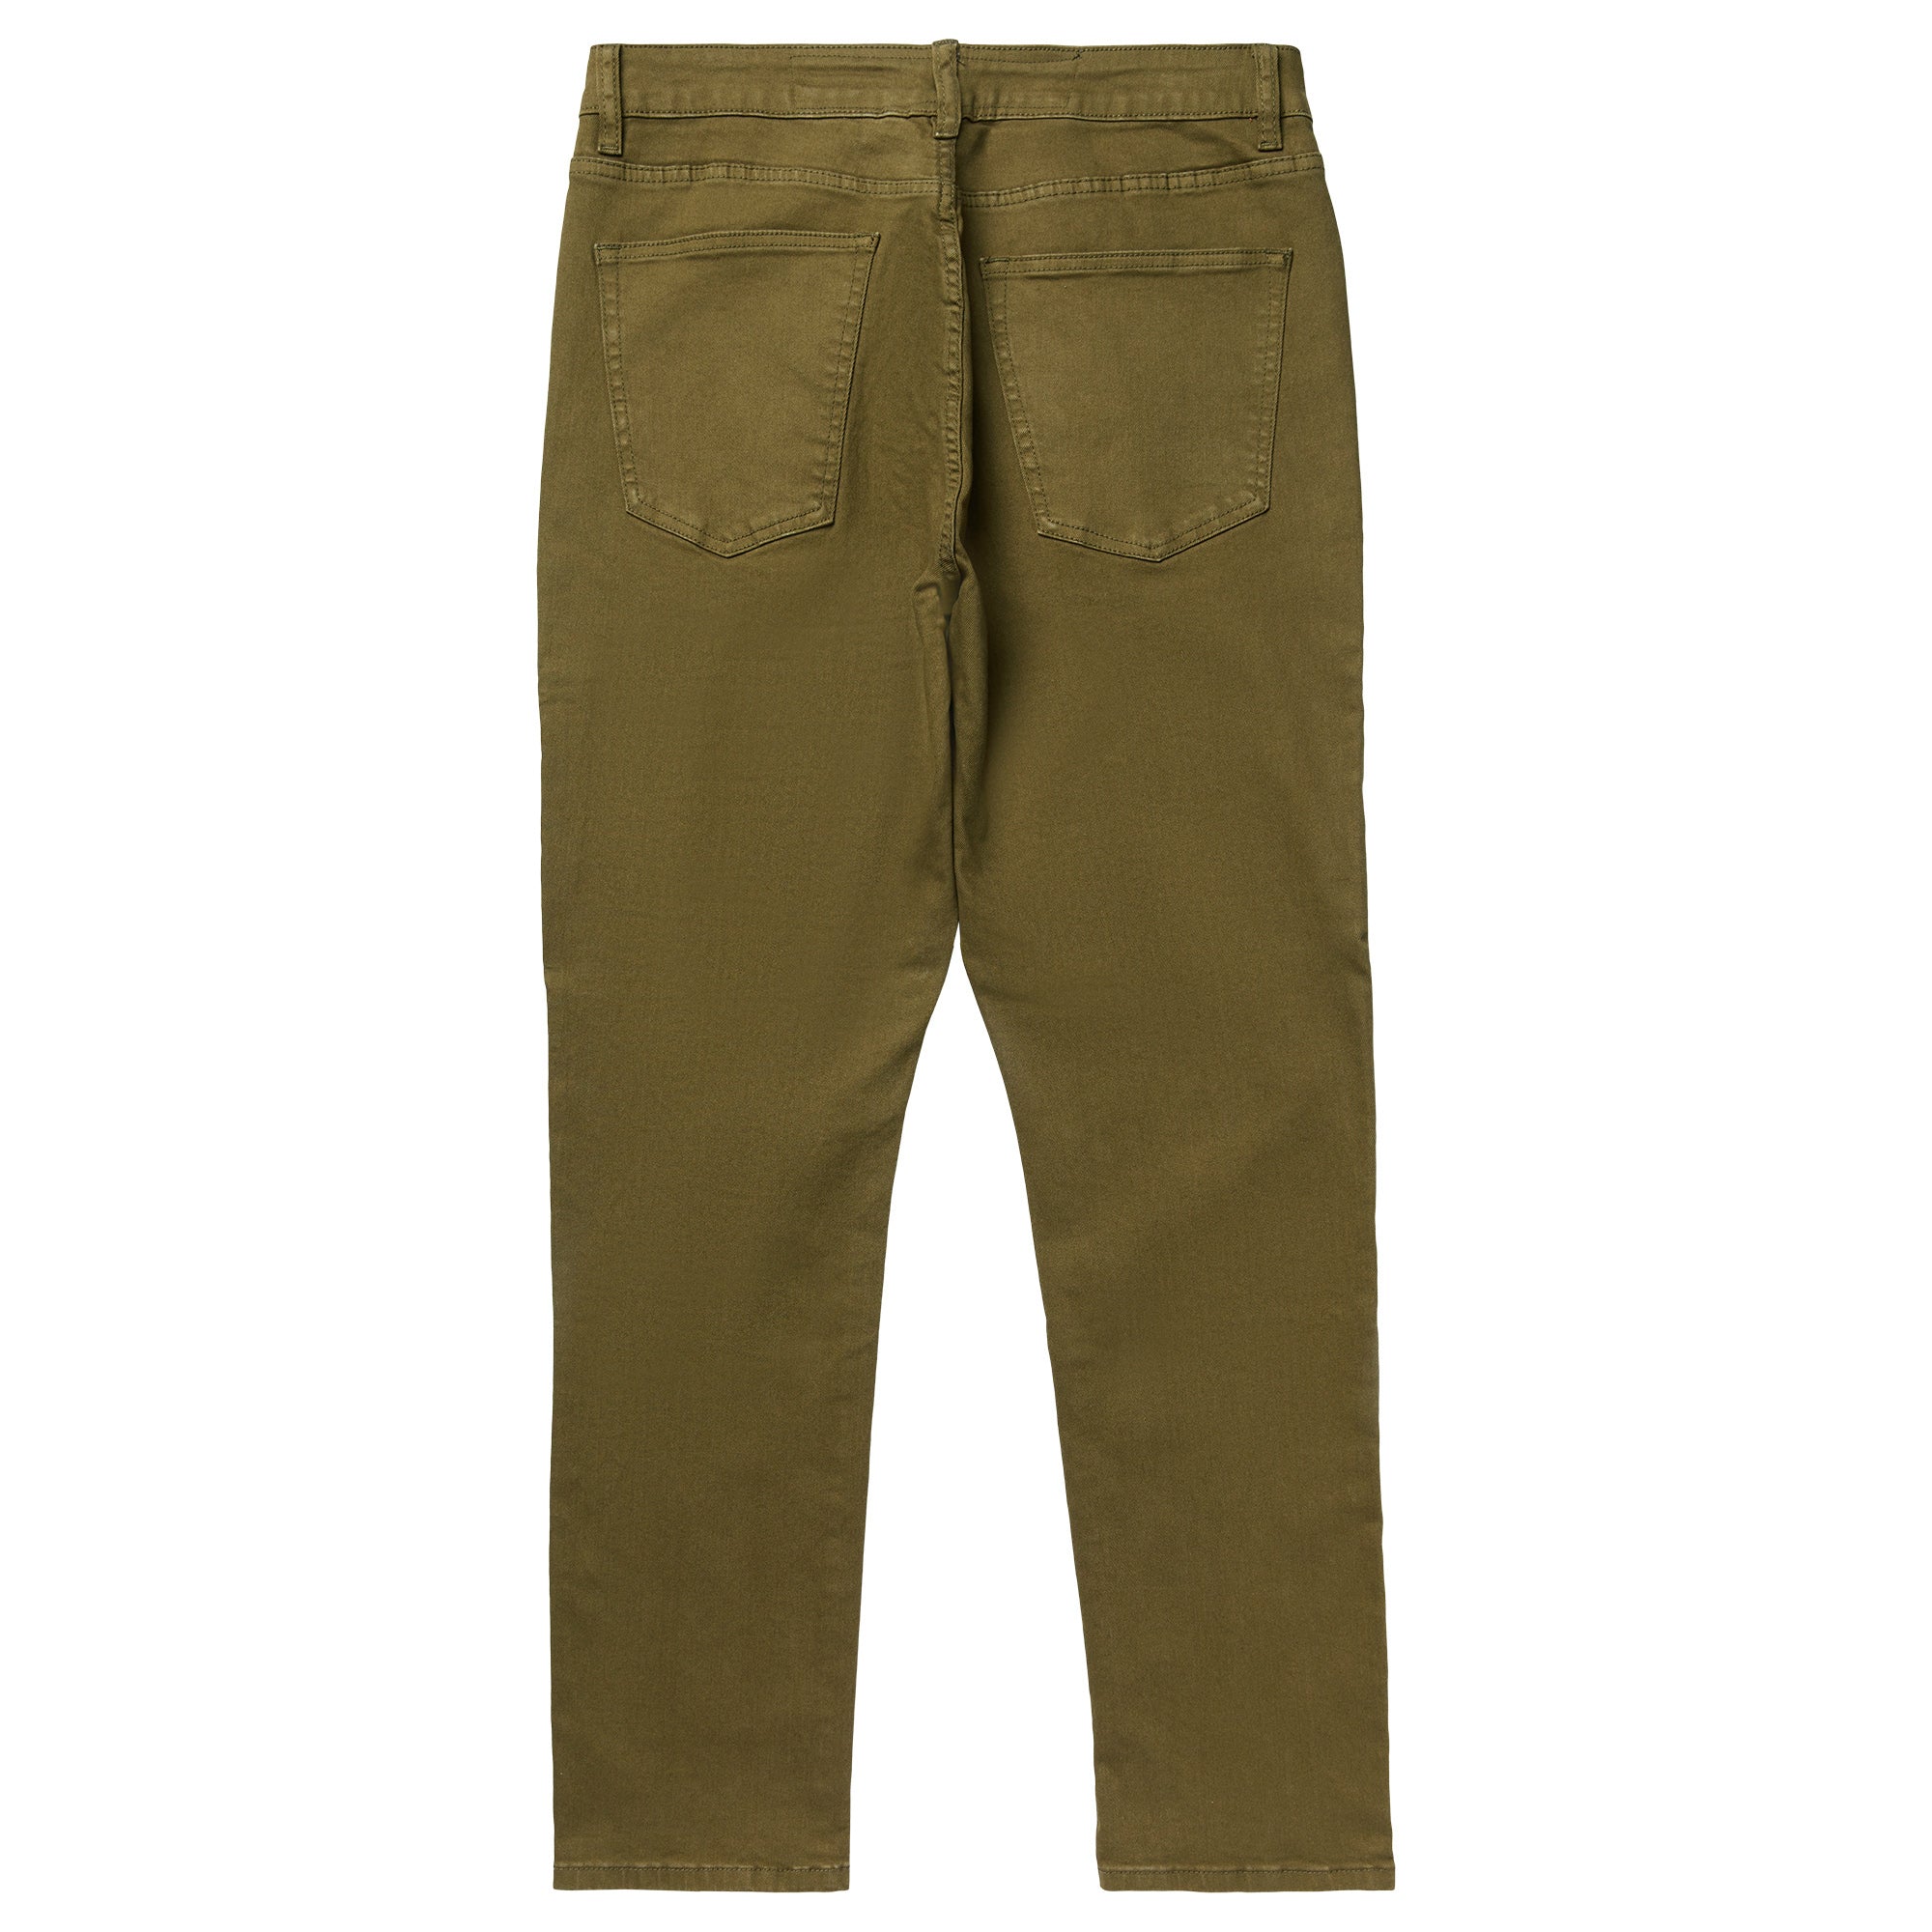 Buy Women Olive Twill Straight Pants Online At Best Price 